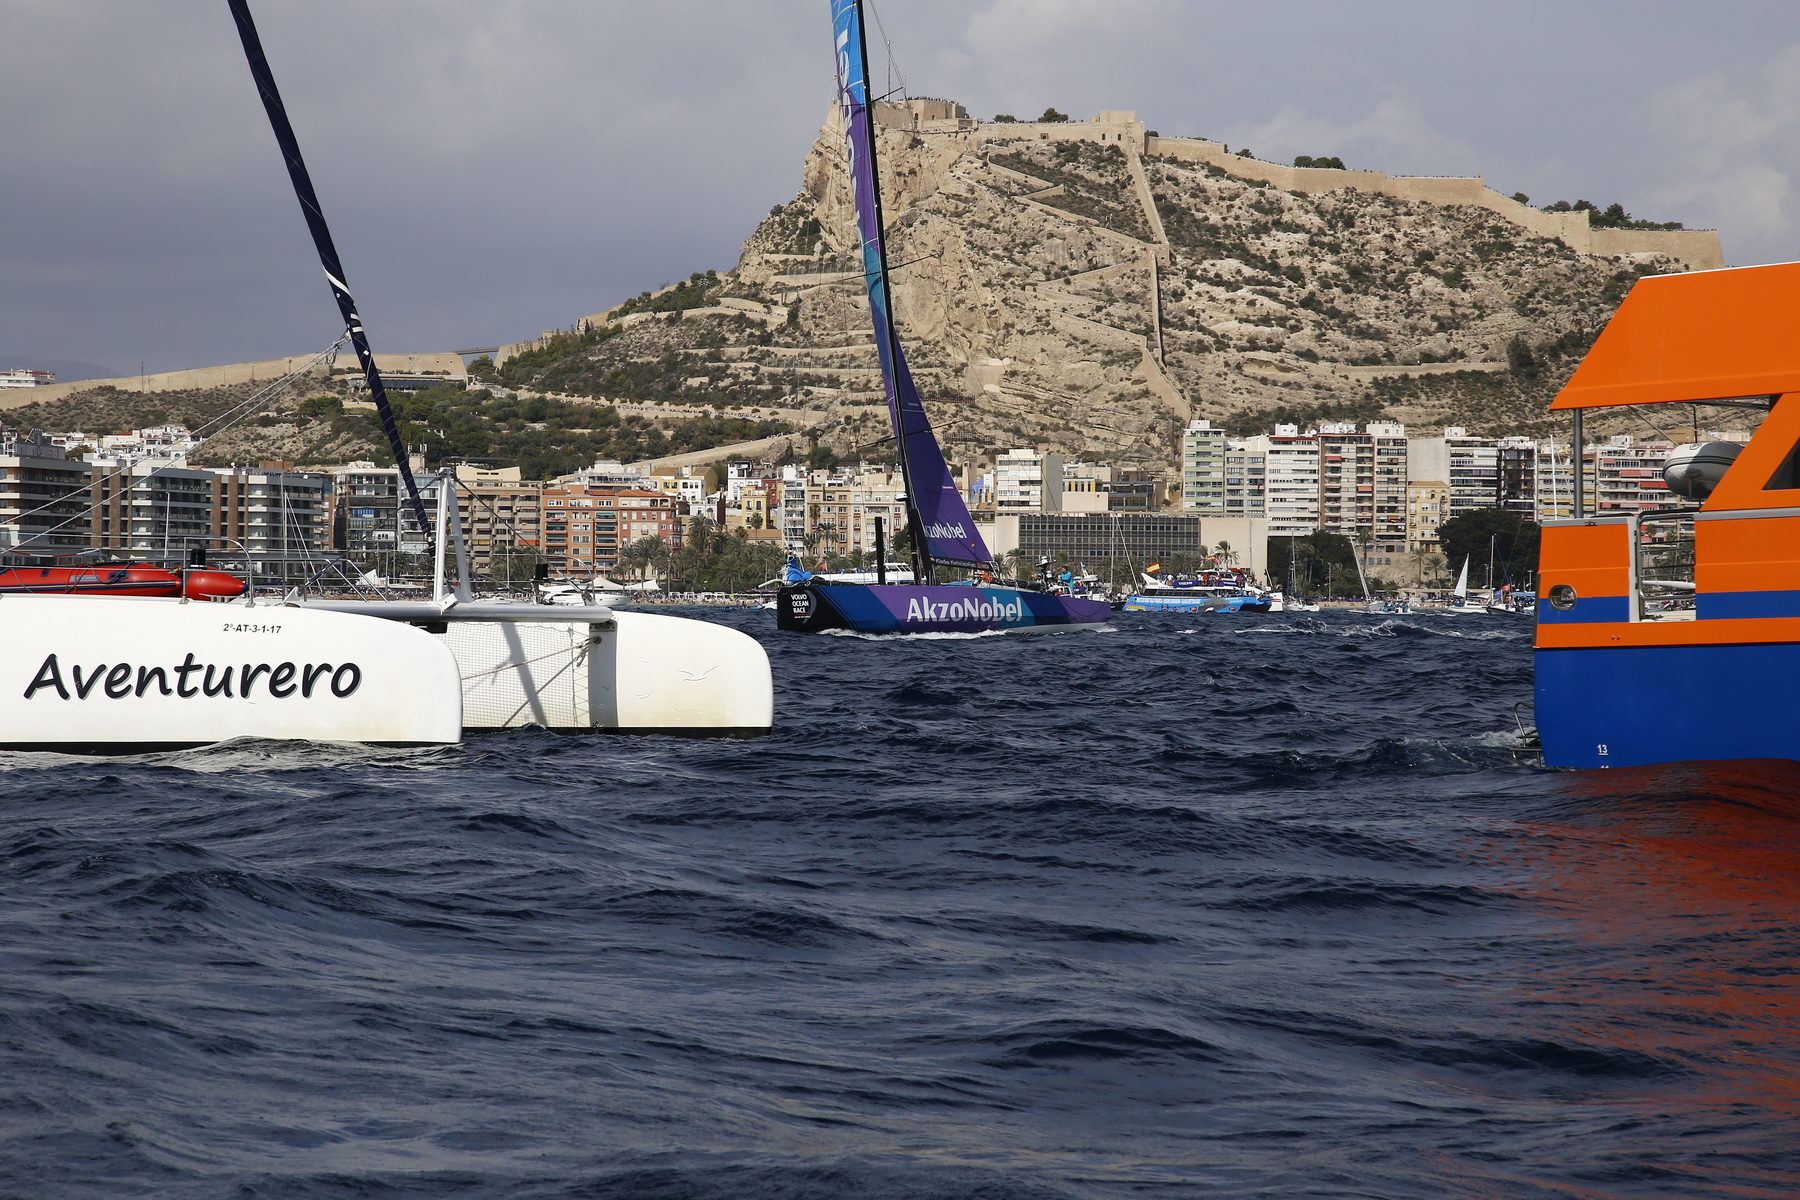 The start of The Ocean Race is approaching and the teams are starting to assemble in Alicante